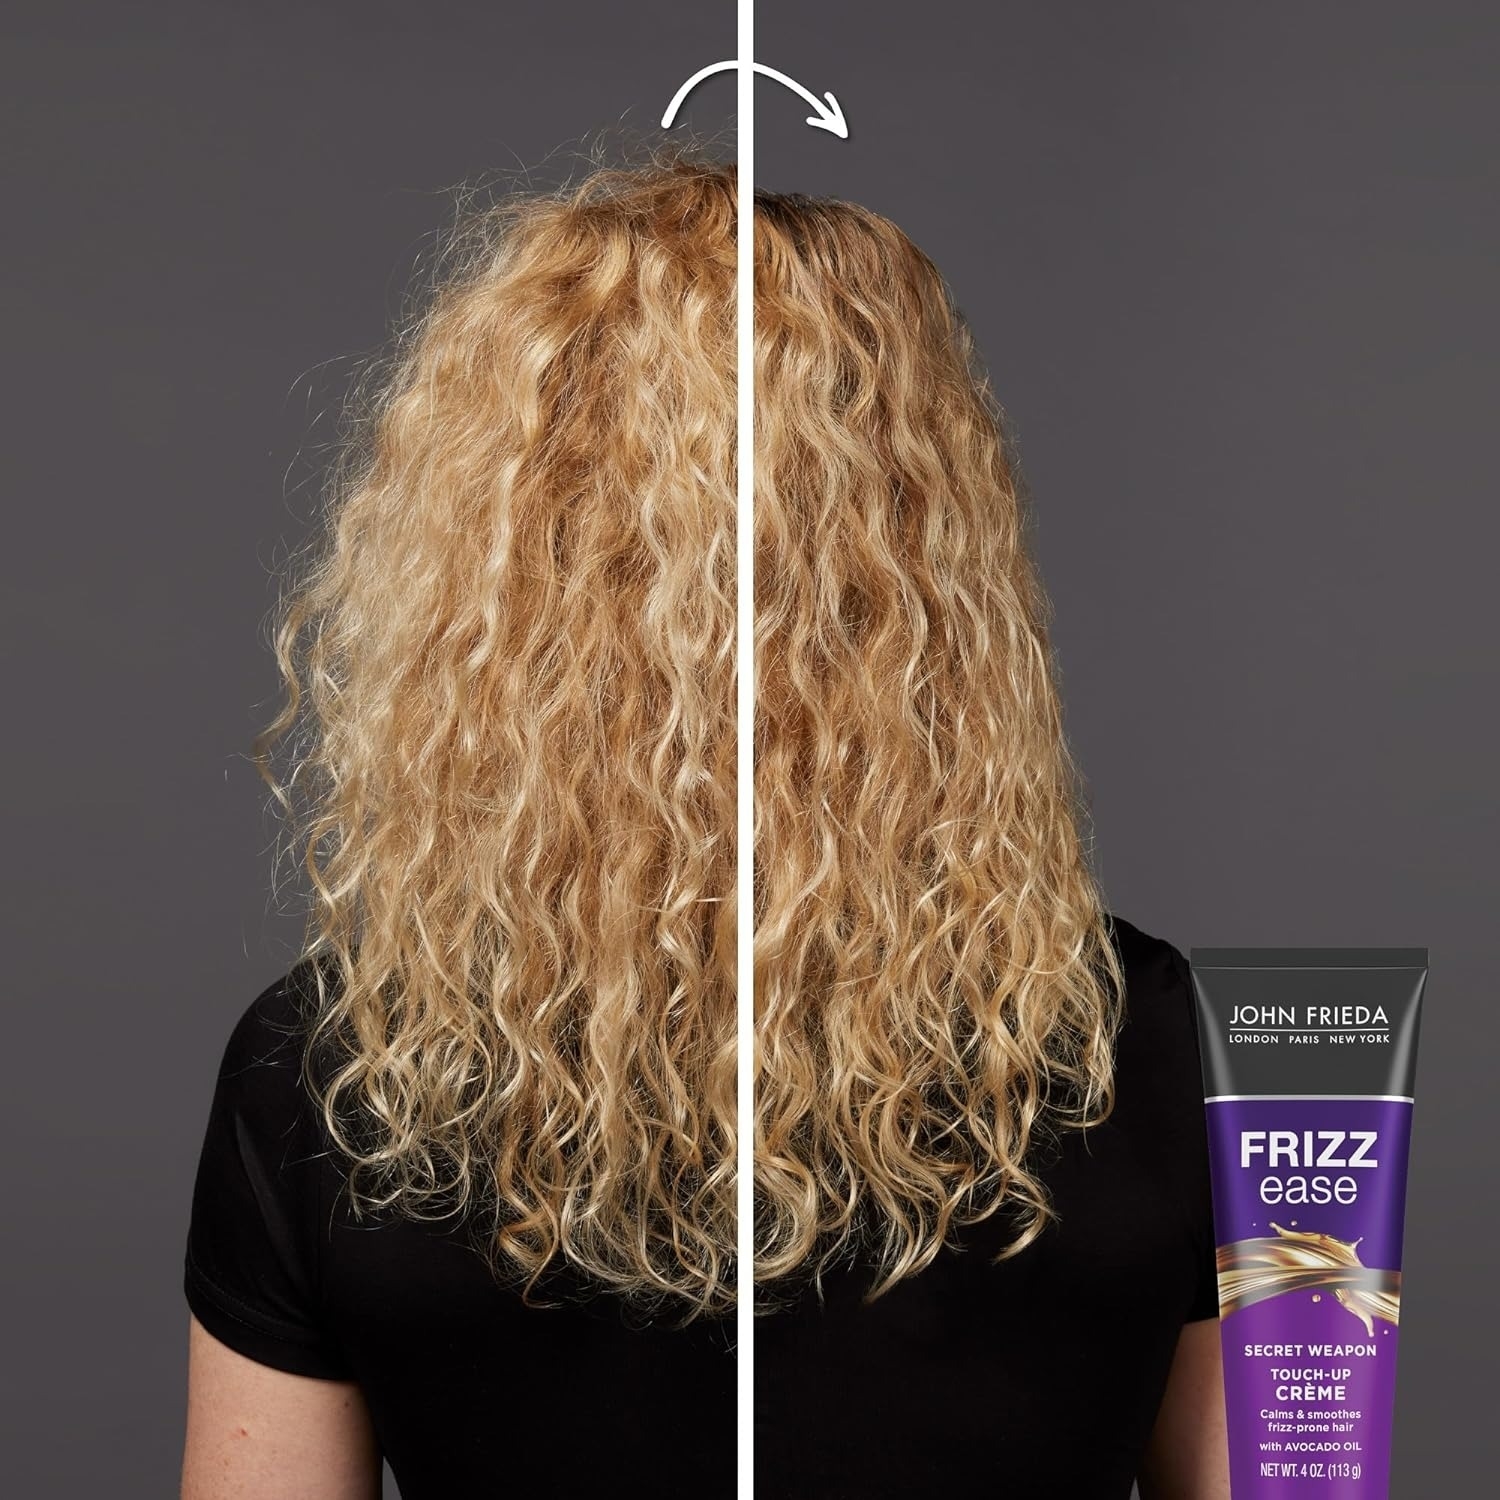 Back view of a model&#x27;s hair showing half frizzy hair on the left and hair treated hair with John Frieda Frizz Ease product visible on the right